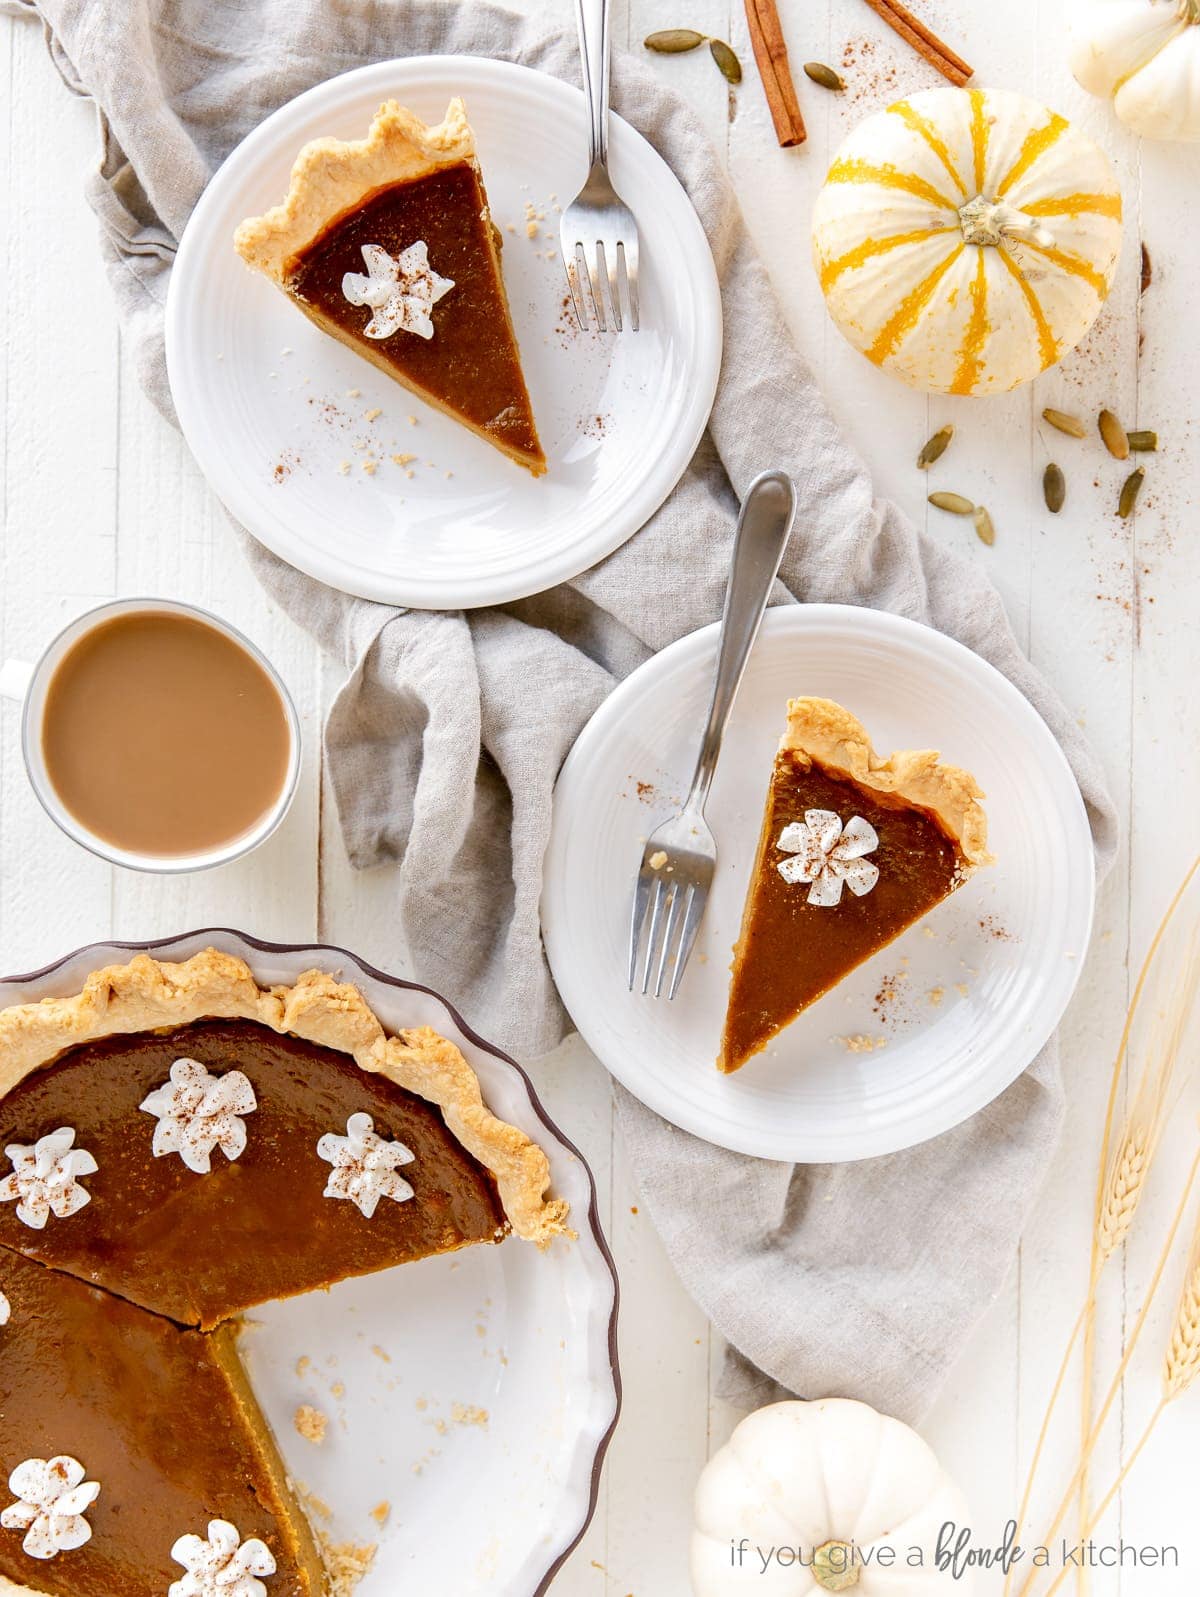 pumpkin pie slices on round plates with forks next to pie plate with remaining pie.